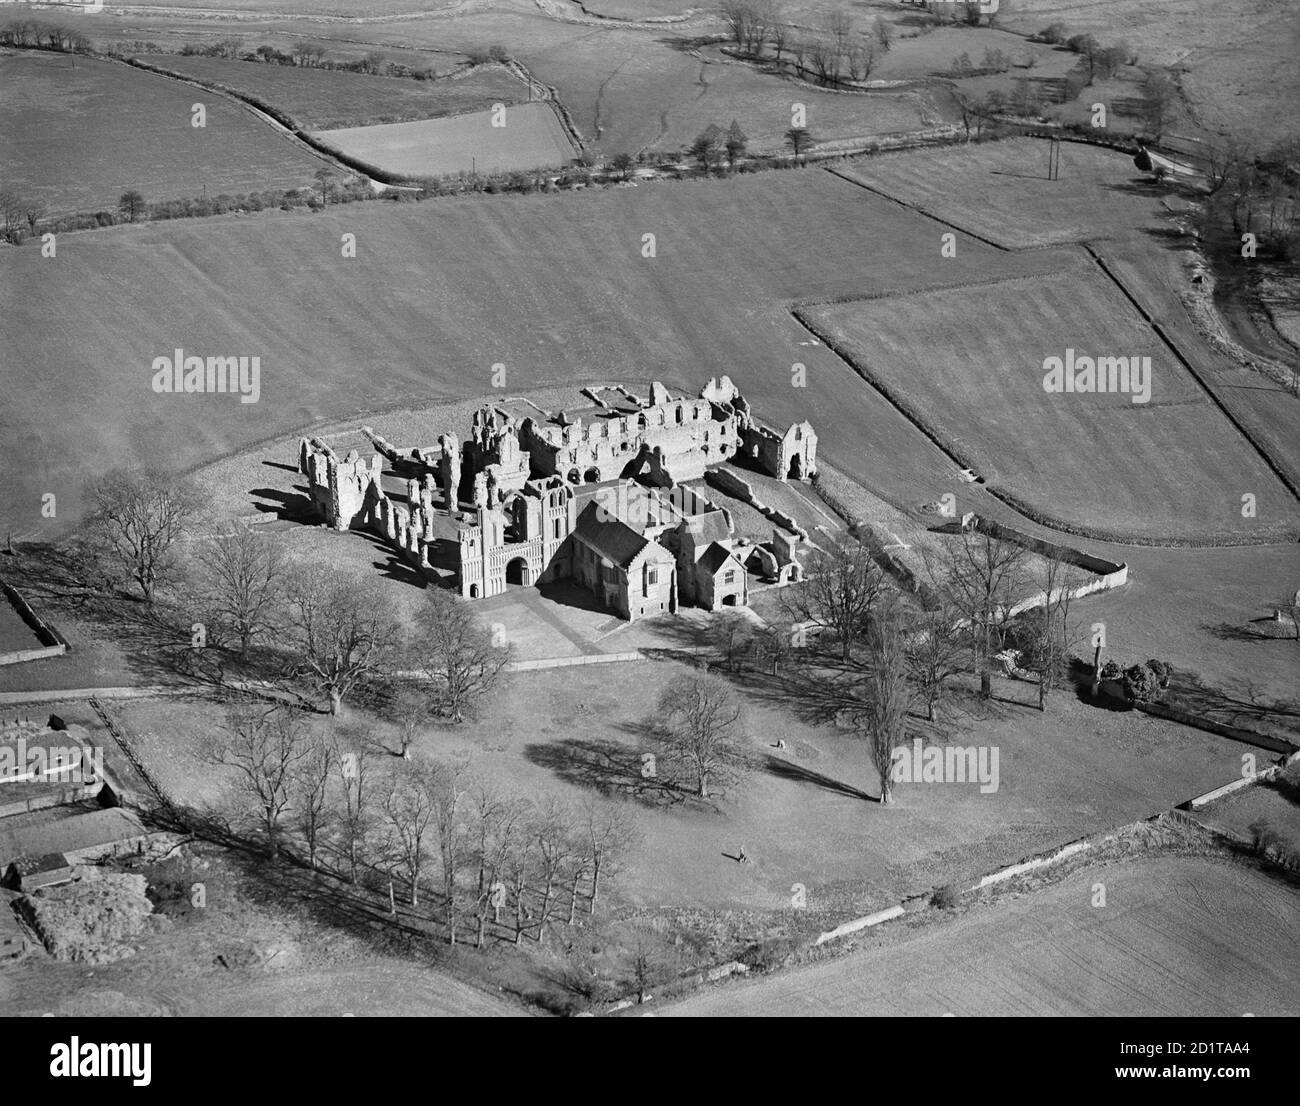 CASTLE ACRE PRIORY, Norfolk. Aerial view of the Priory ruins. Photographed by Aeropictorial in April 1946. Aerofilms Collection (see Links). Stock Photo